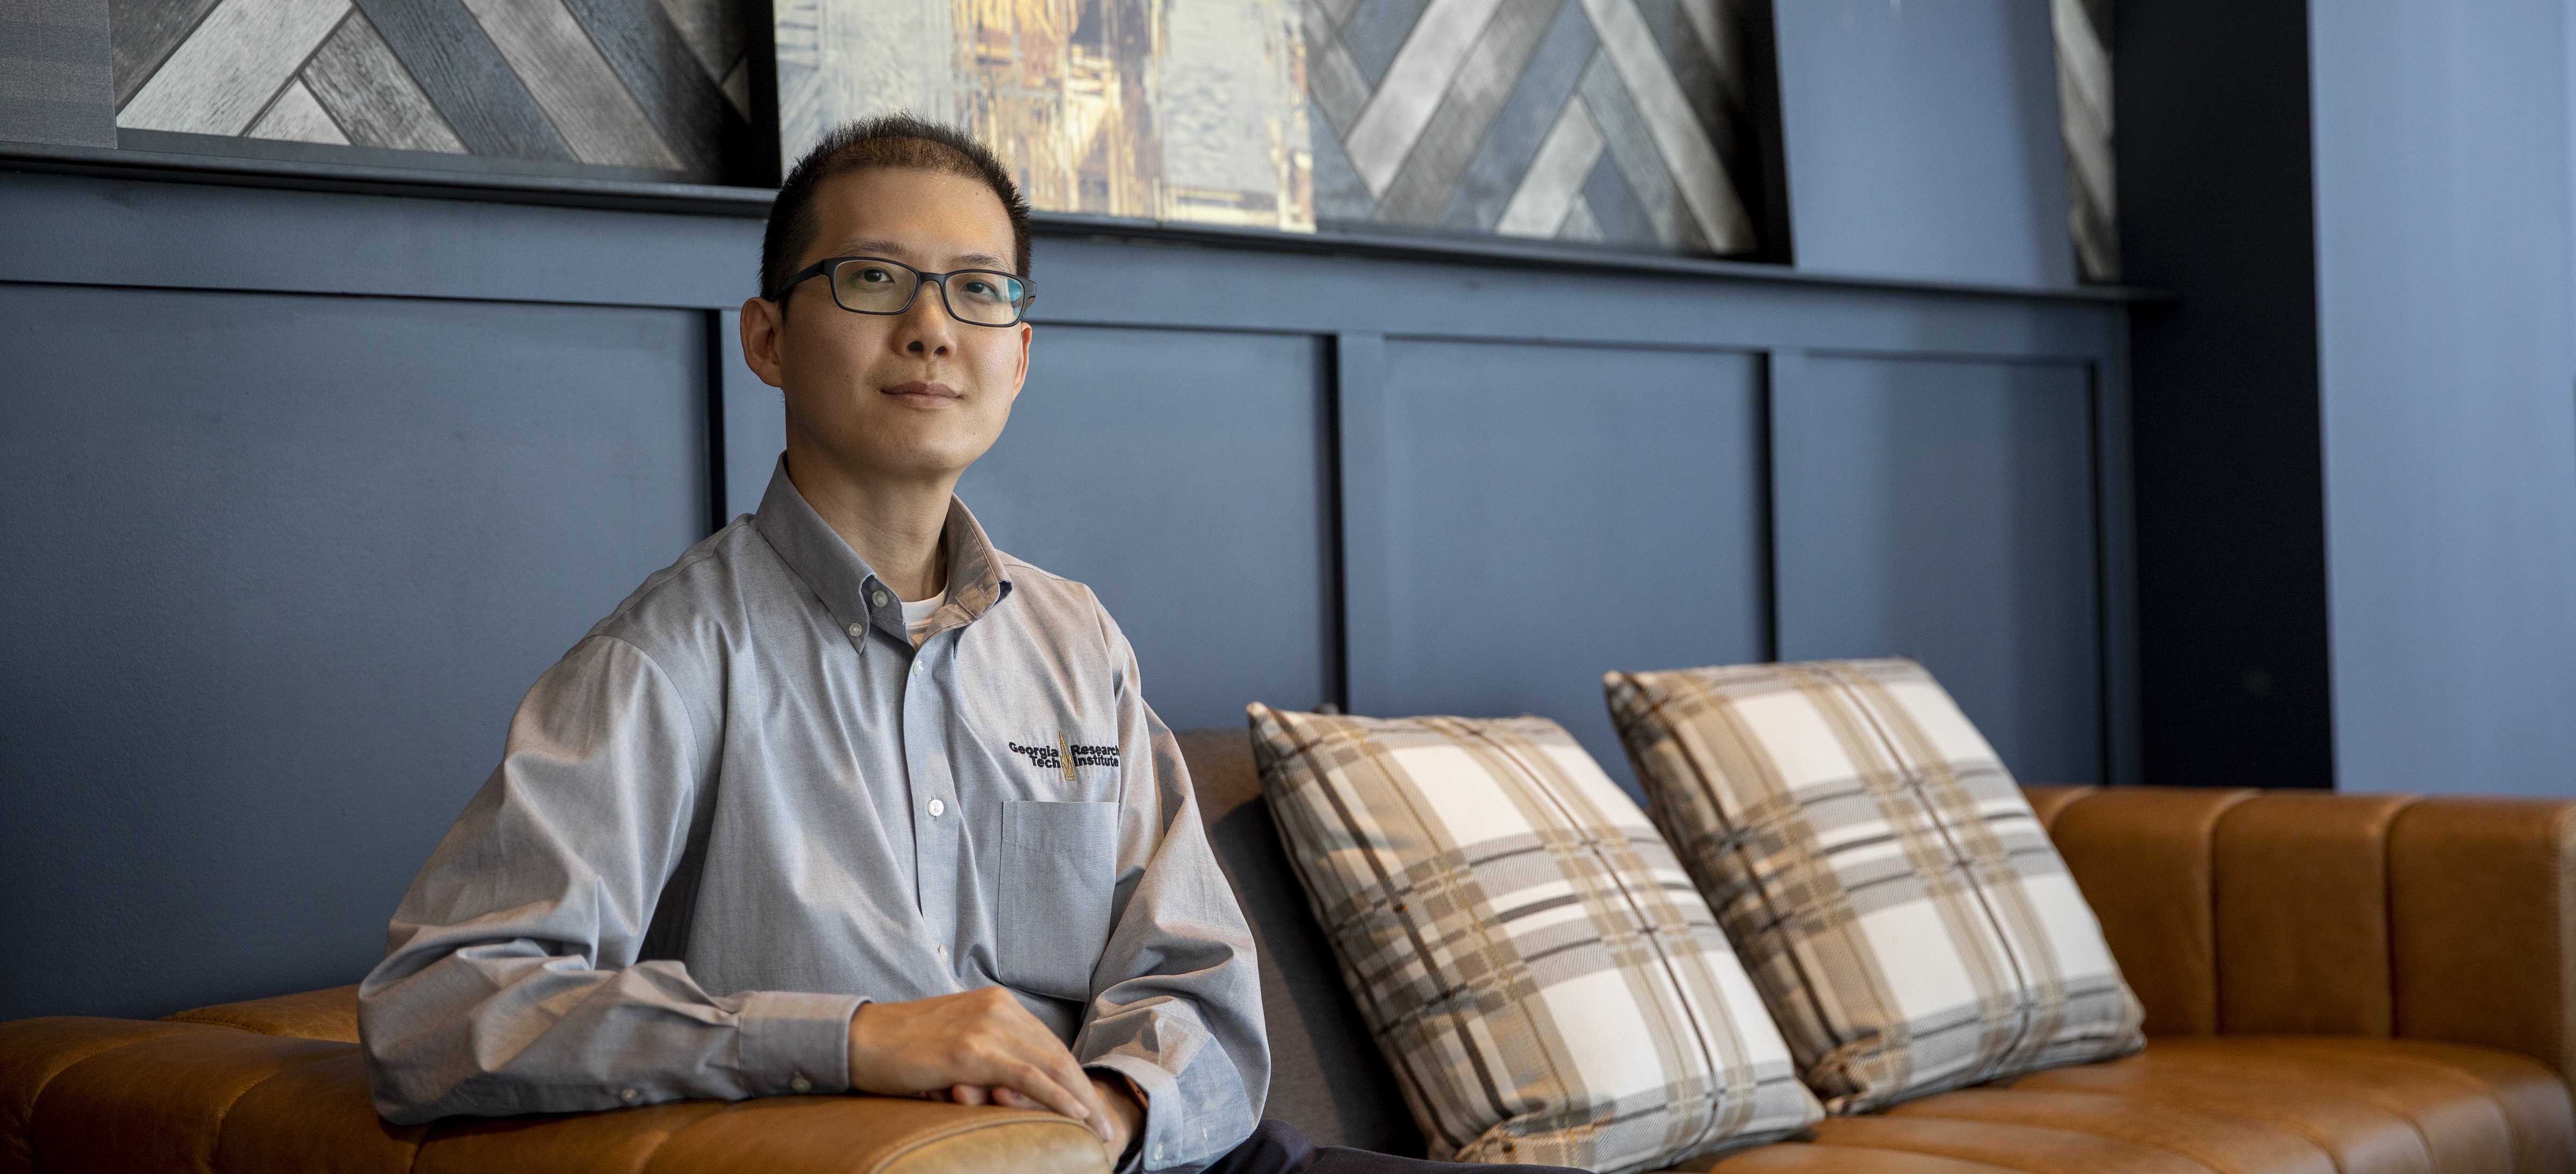 GTRI Senior Research Scientist David Tran realized that he could use his artistic mindset in the computer science field. (Credit: Sean McNeil)